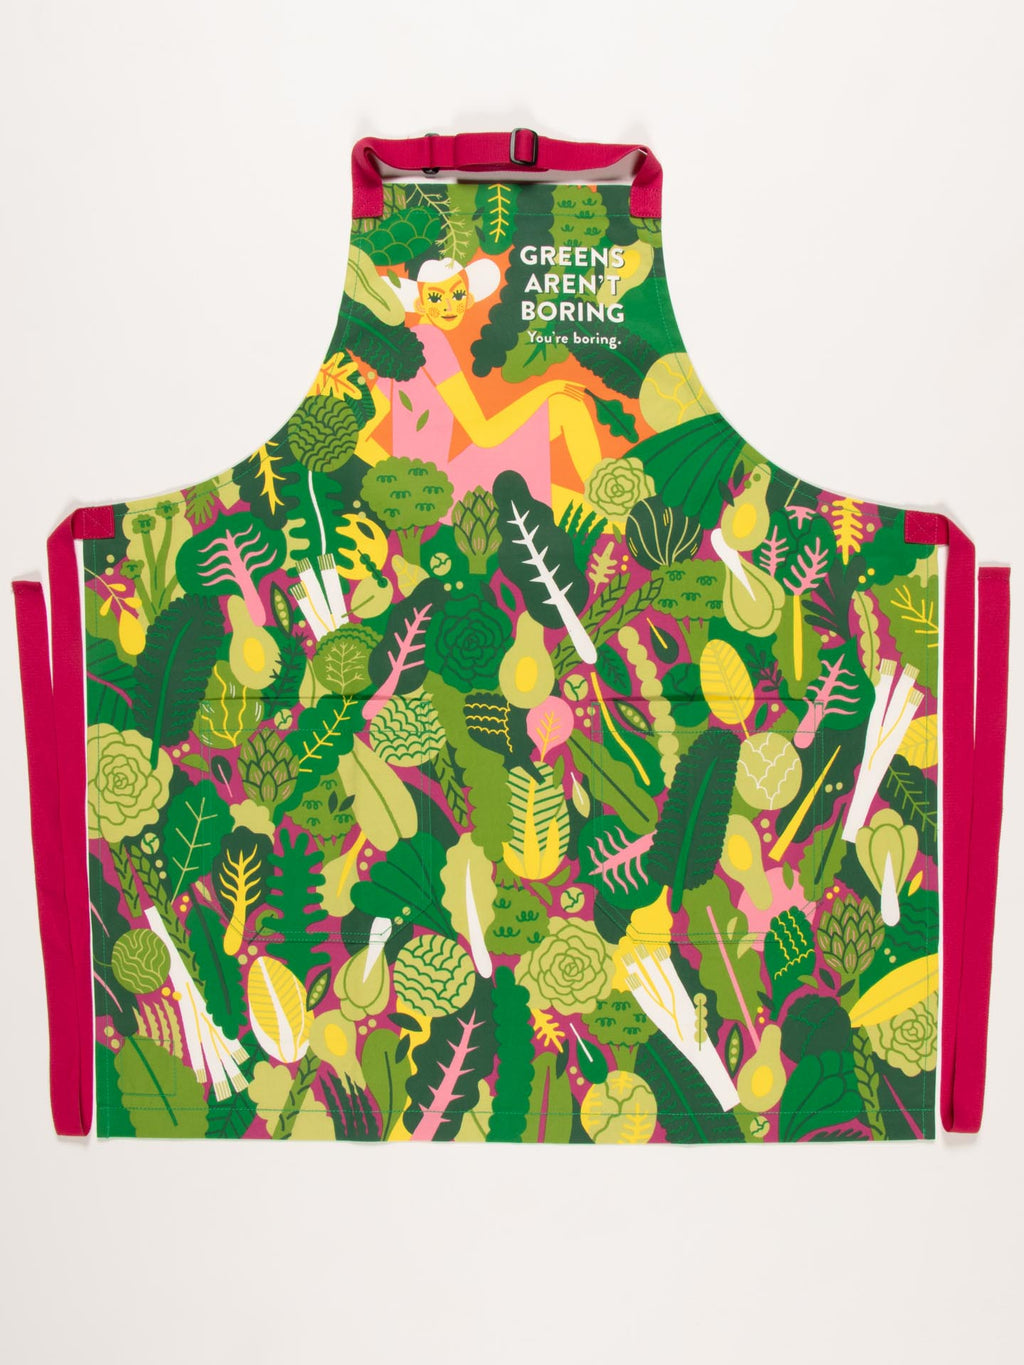 Greens arnt boring, you are Apron